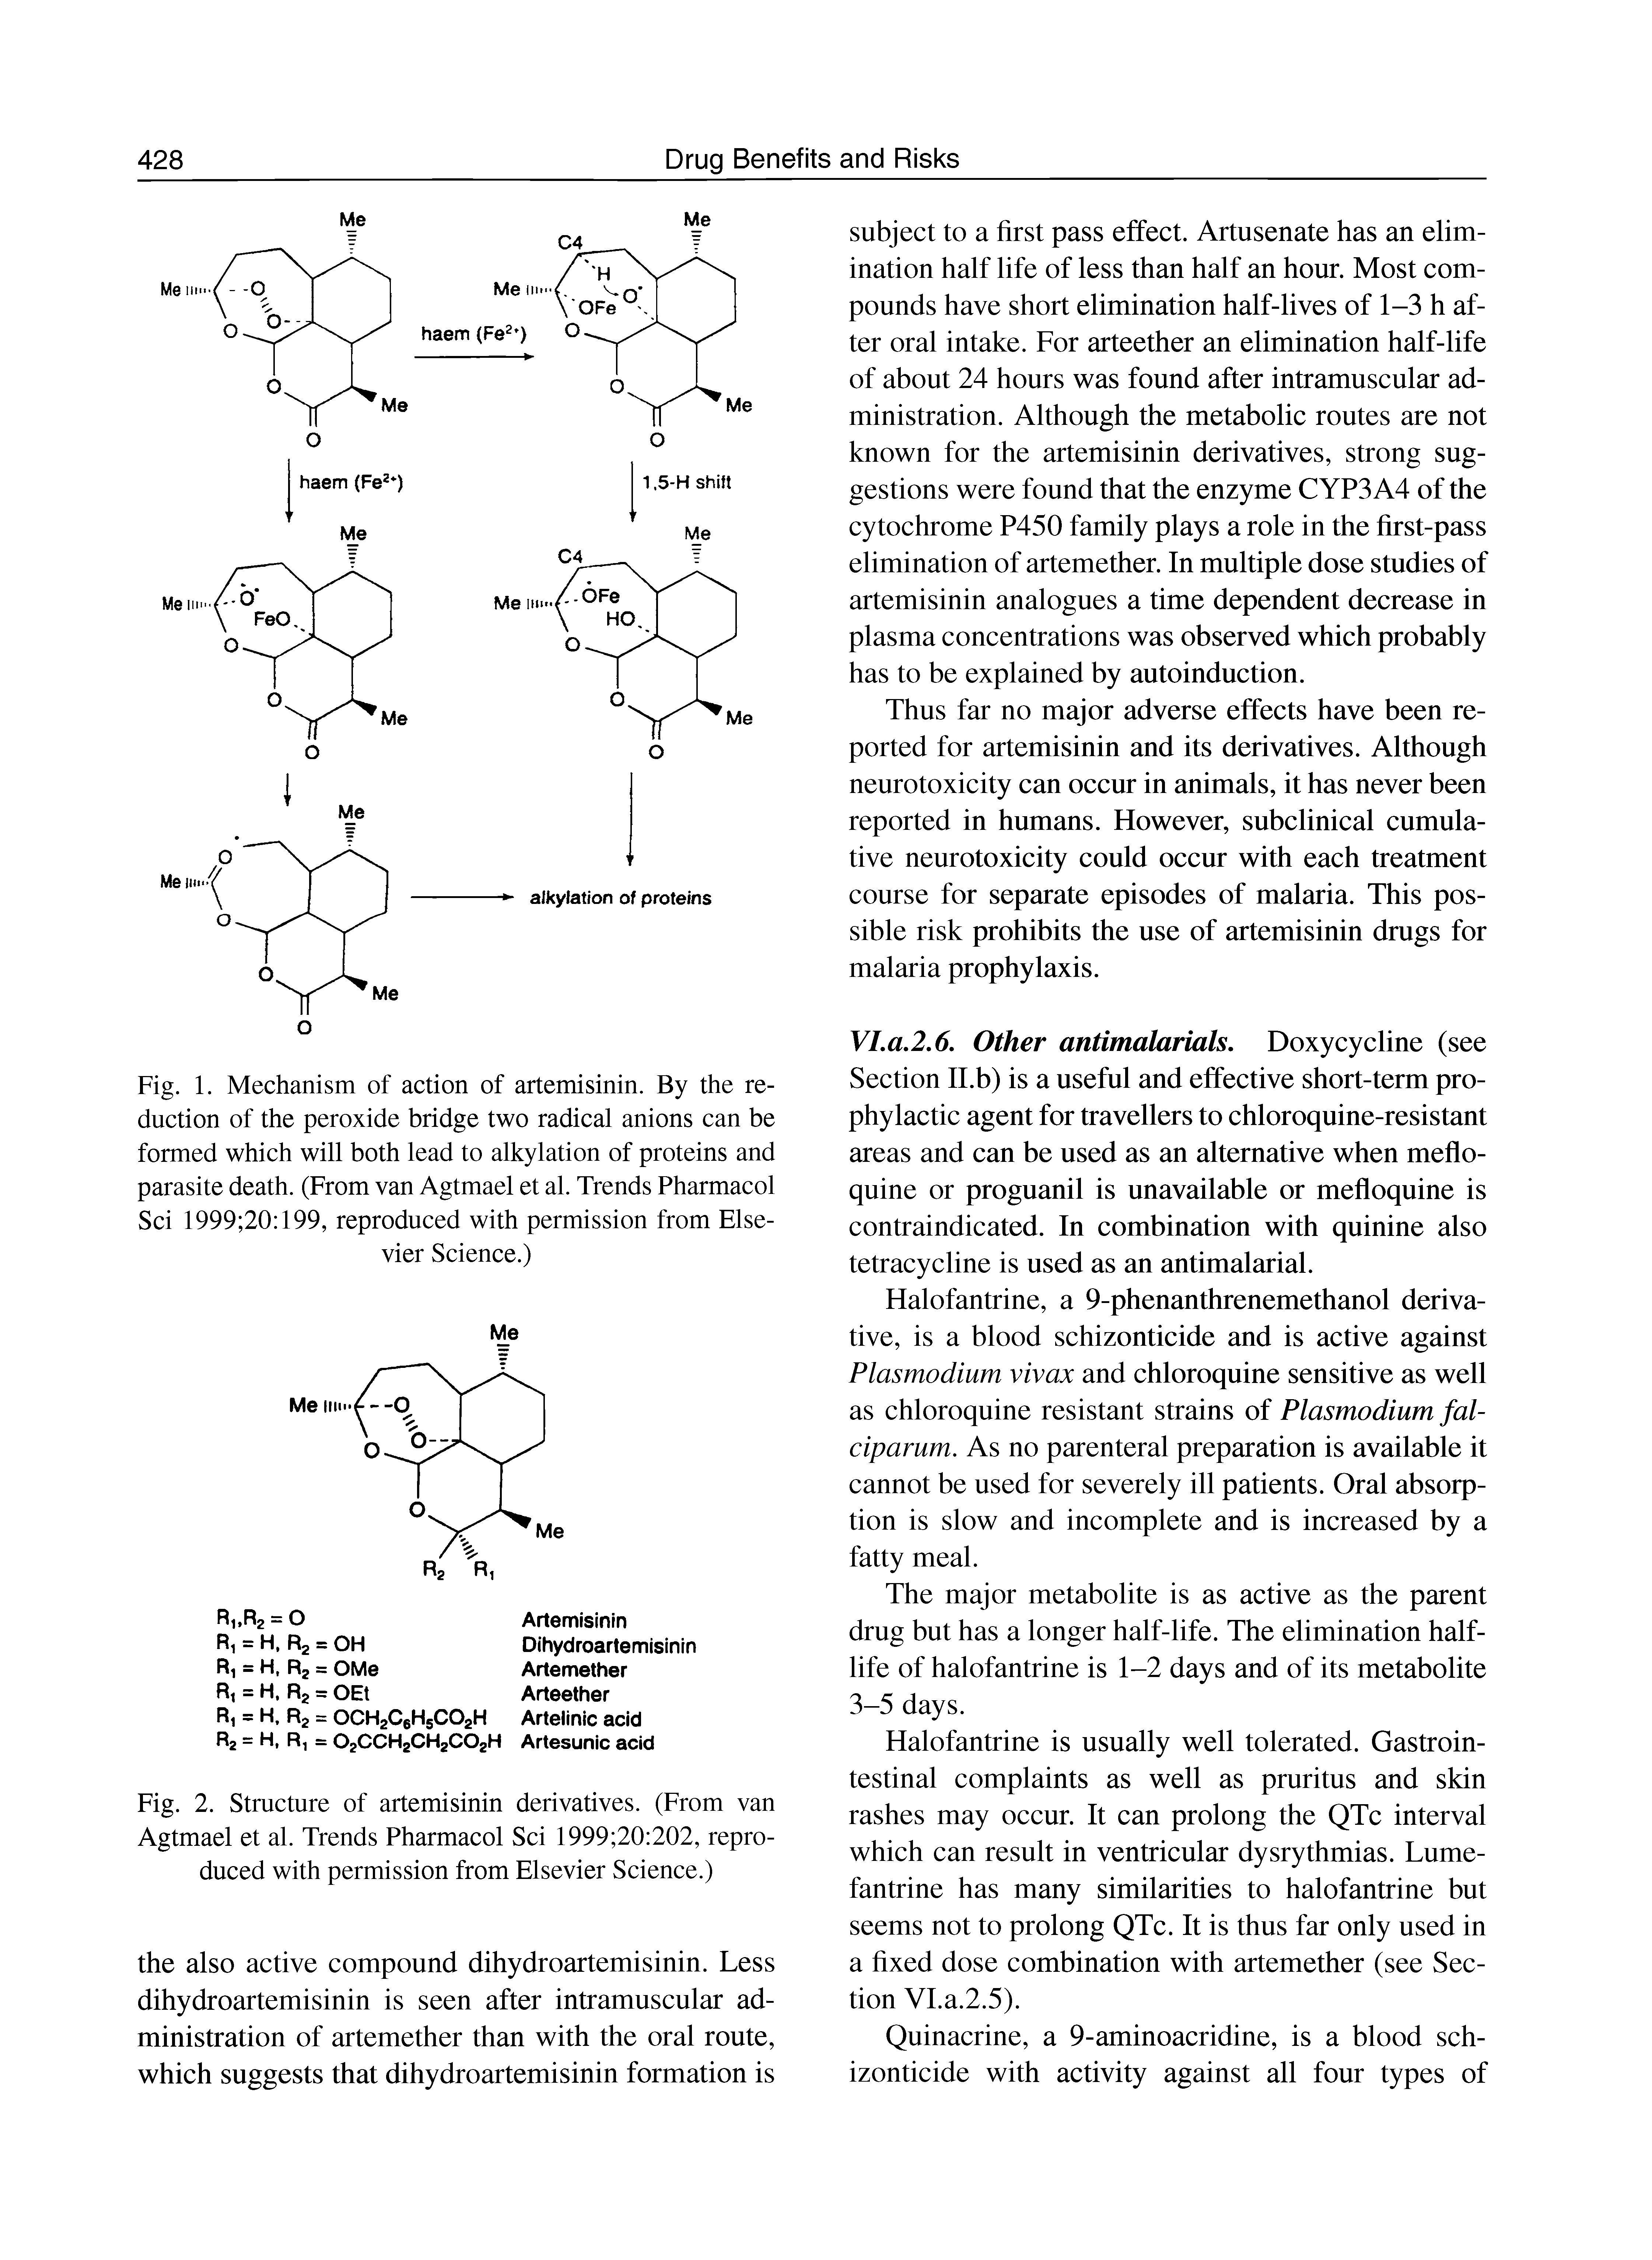 Fig. 2. Structure of artemisinin derivatives. (From van Agtmael et al. Trends Pharmacol Sci 1999 20 202, reproduced with permission from Elsevier Science.)...